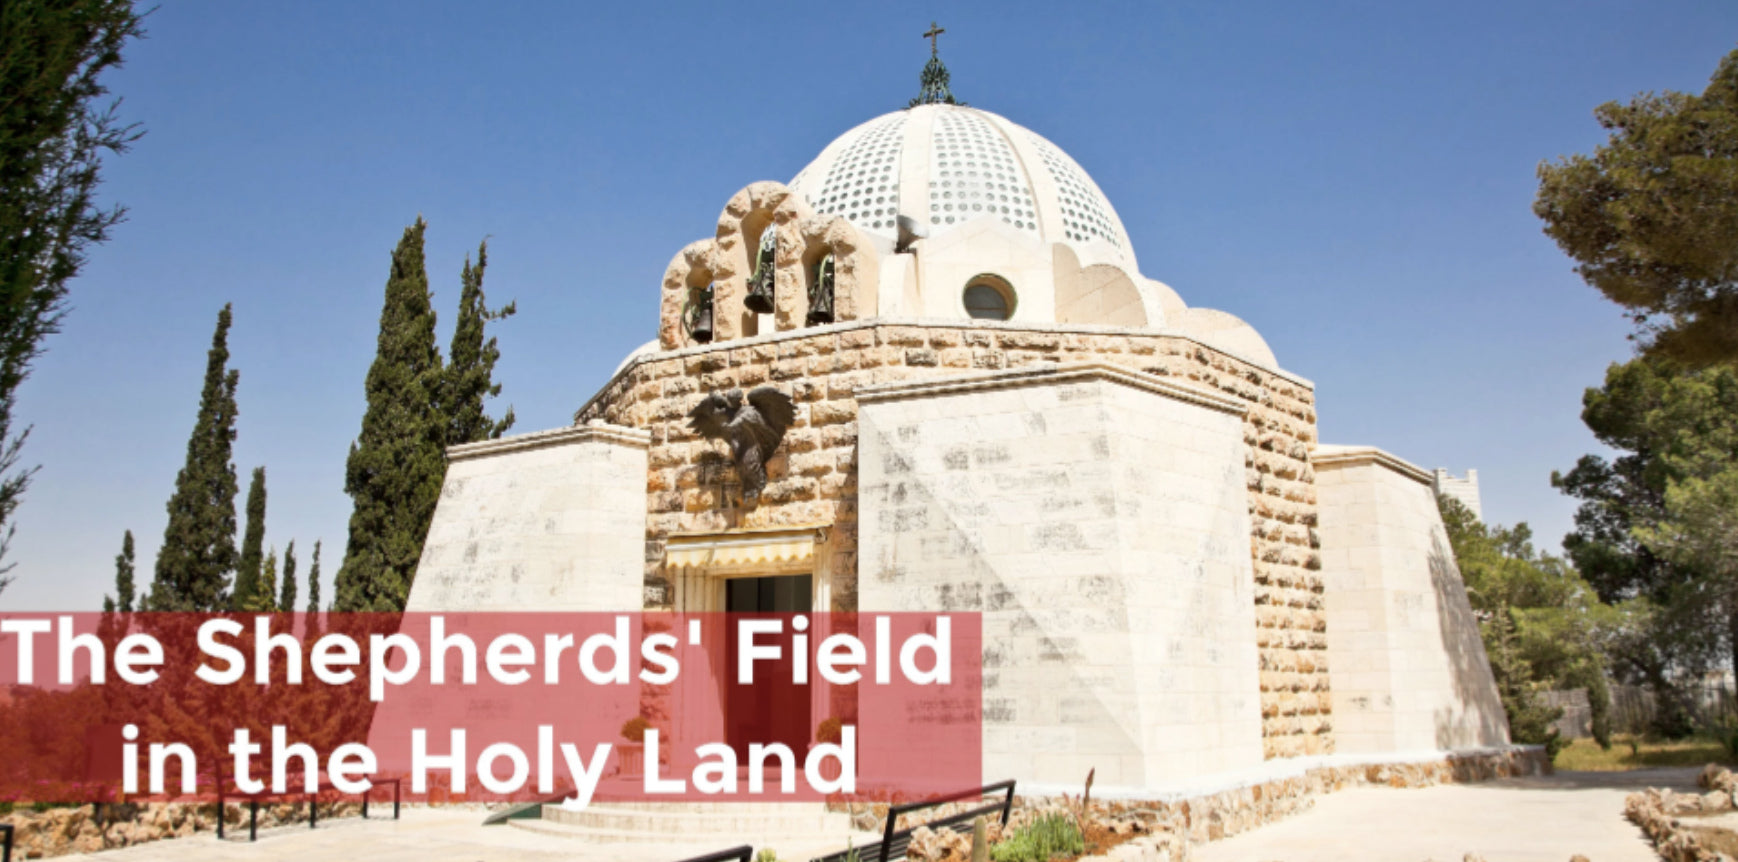 The Shepherds' Field Church in the Holy Land